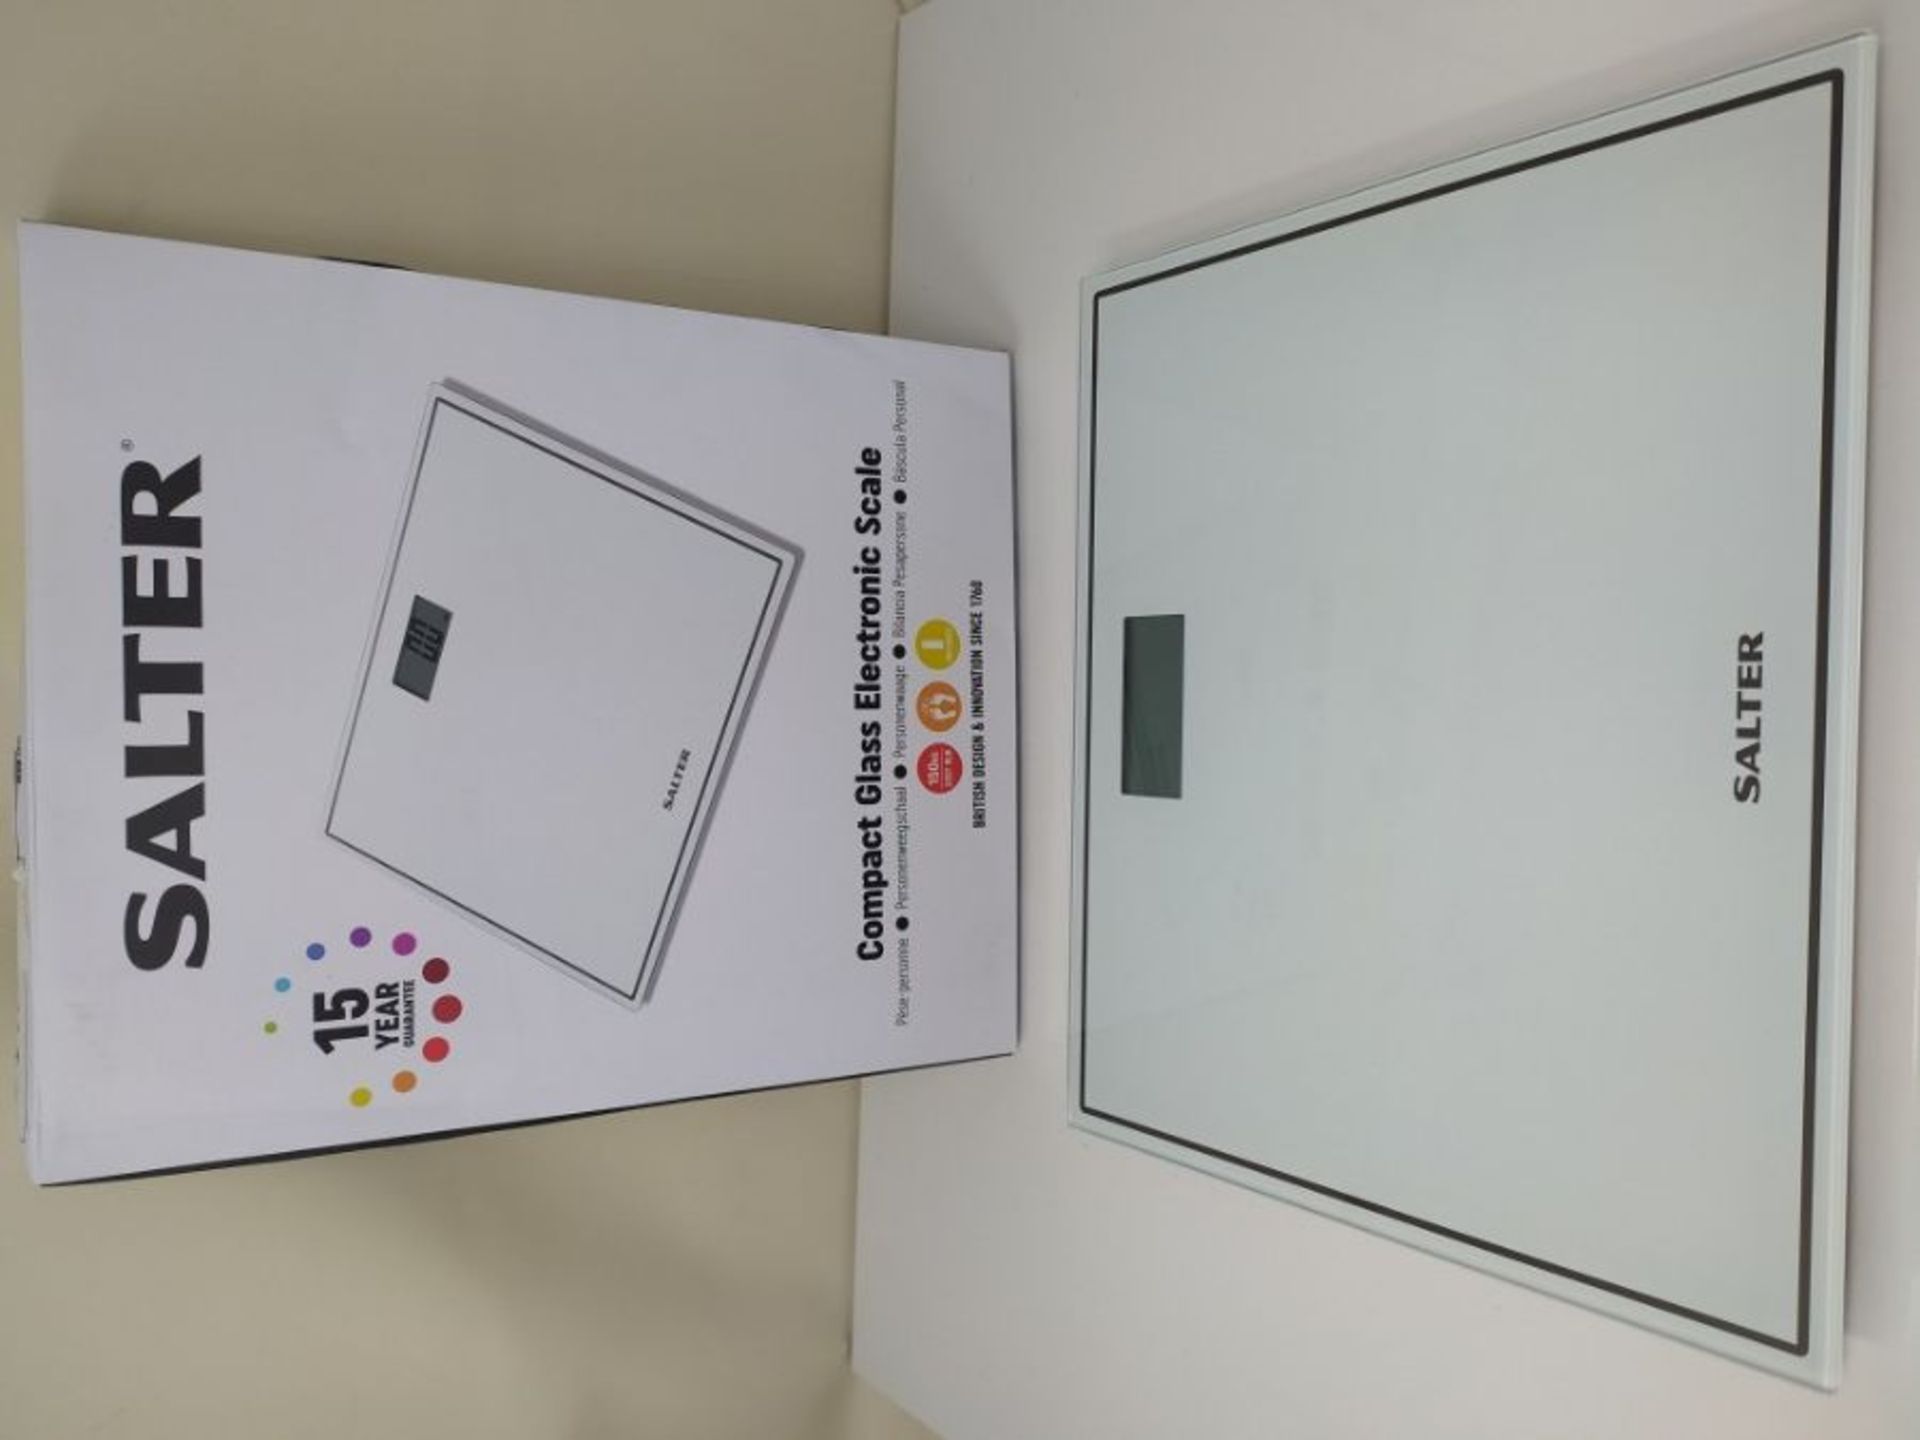 Salter Compact Digital Bathroom Scales - Toughened Glass, Measure Body Weight Metric / - Image 2 of 2